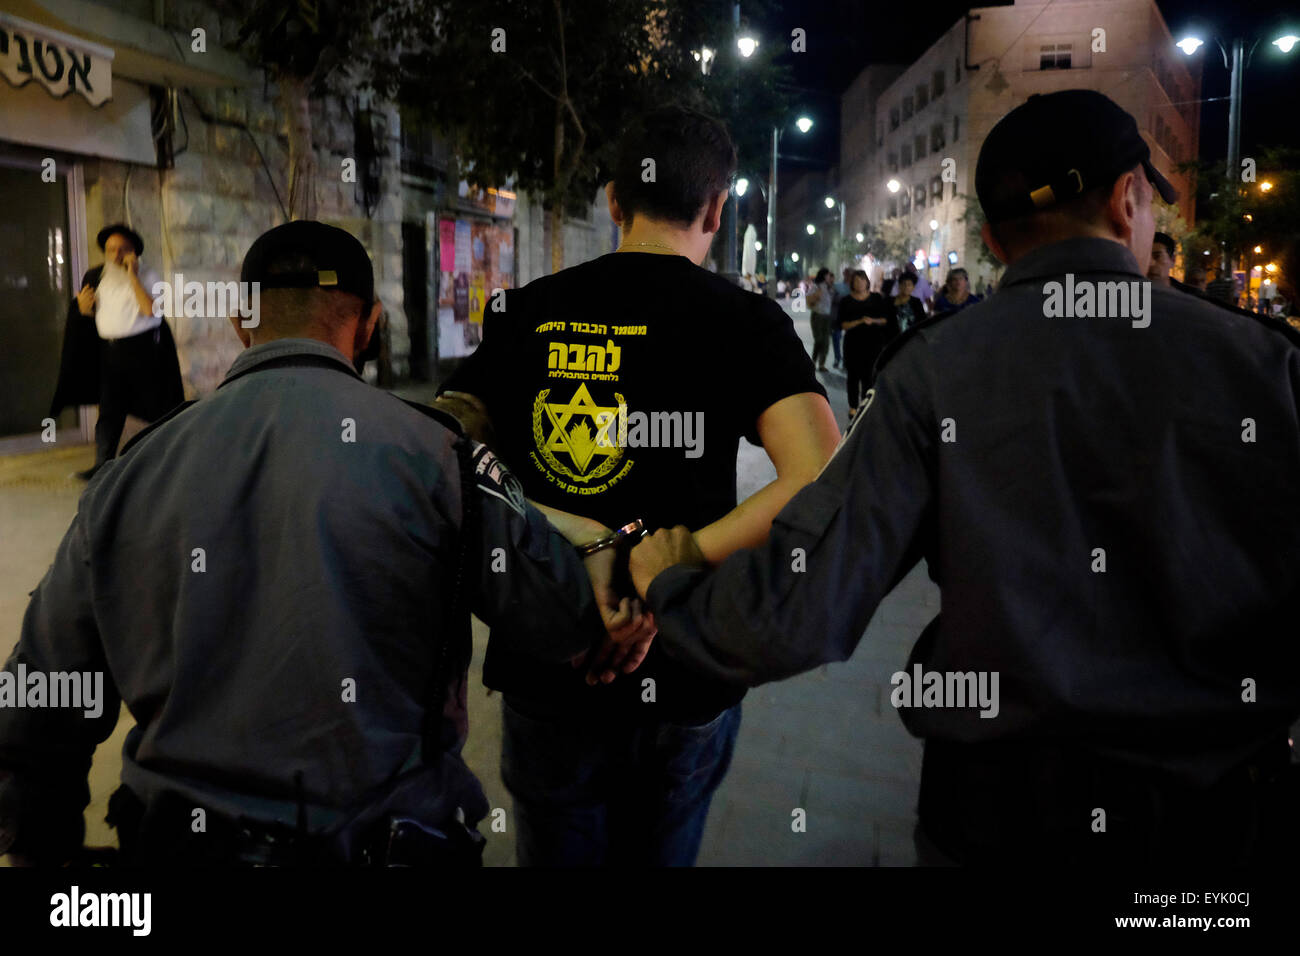 Jerusalem Israel 30th July 2015. An activist of Lehava group is detained by Israeli policemen in downtown Jerusalem on 30 July 2015. Lehava is an Israeli organization whose primary objective is opposing assimilation of Jews, objecting to any personal or business relationships between Jews and non-Jews. It has an anti-miscegenation focus, denouncing marriages between Jewish women and non-Jewish. Lehava also accuses homosexuals of harming Jewish nation. Credit:  Eddie Gerald/Alamy Live News Stock Photo